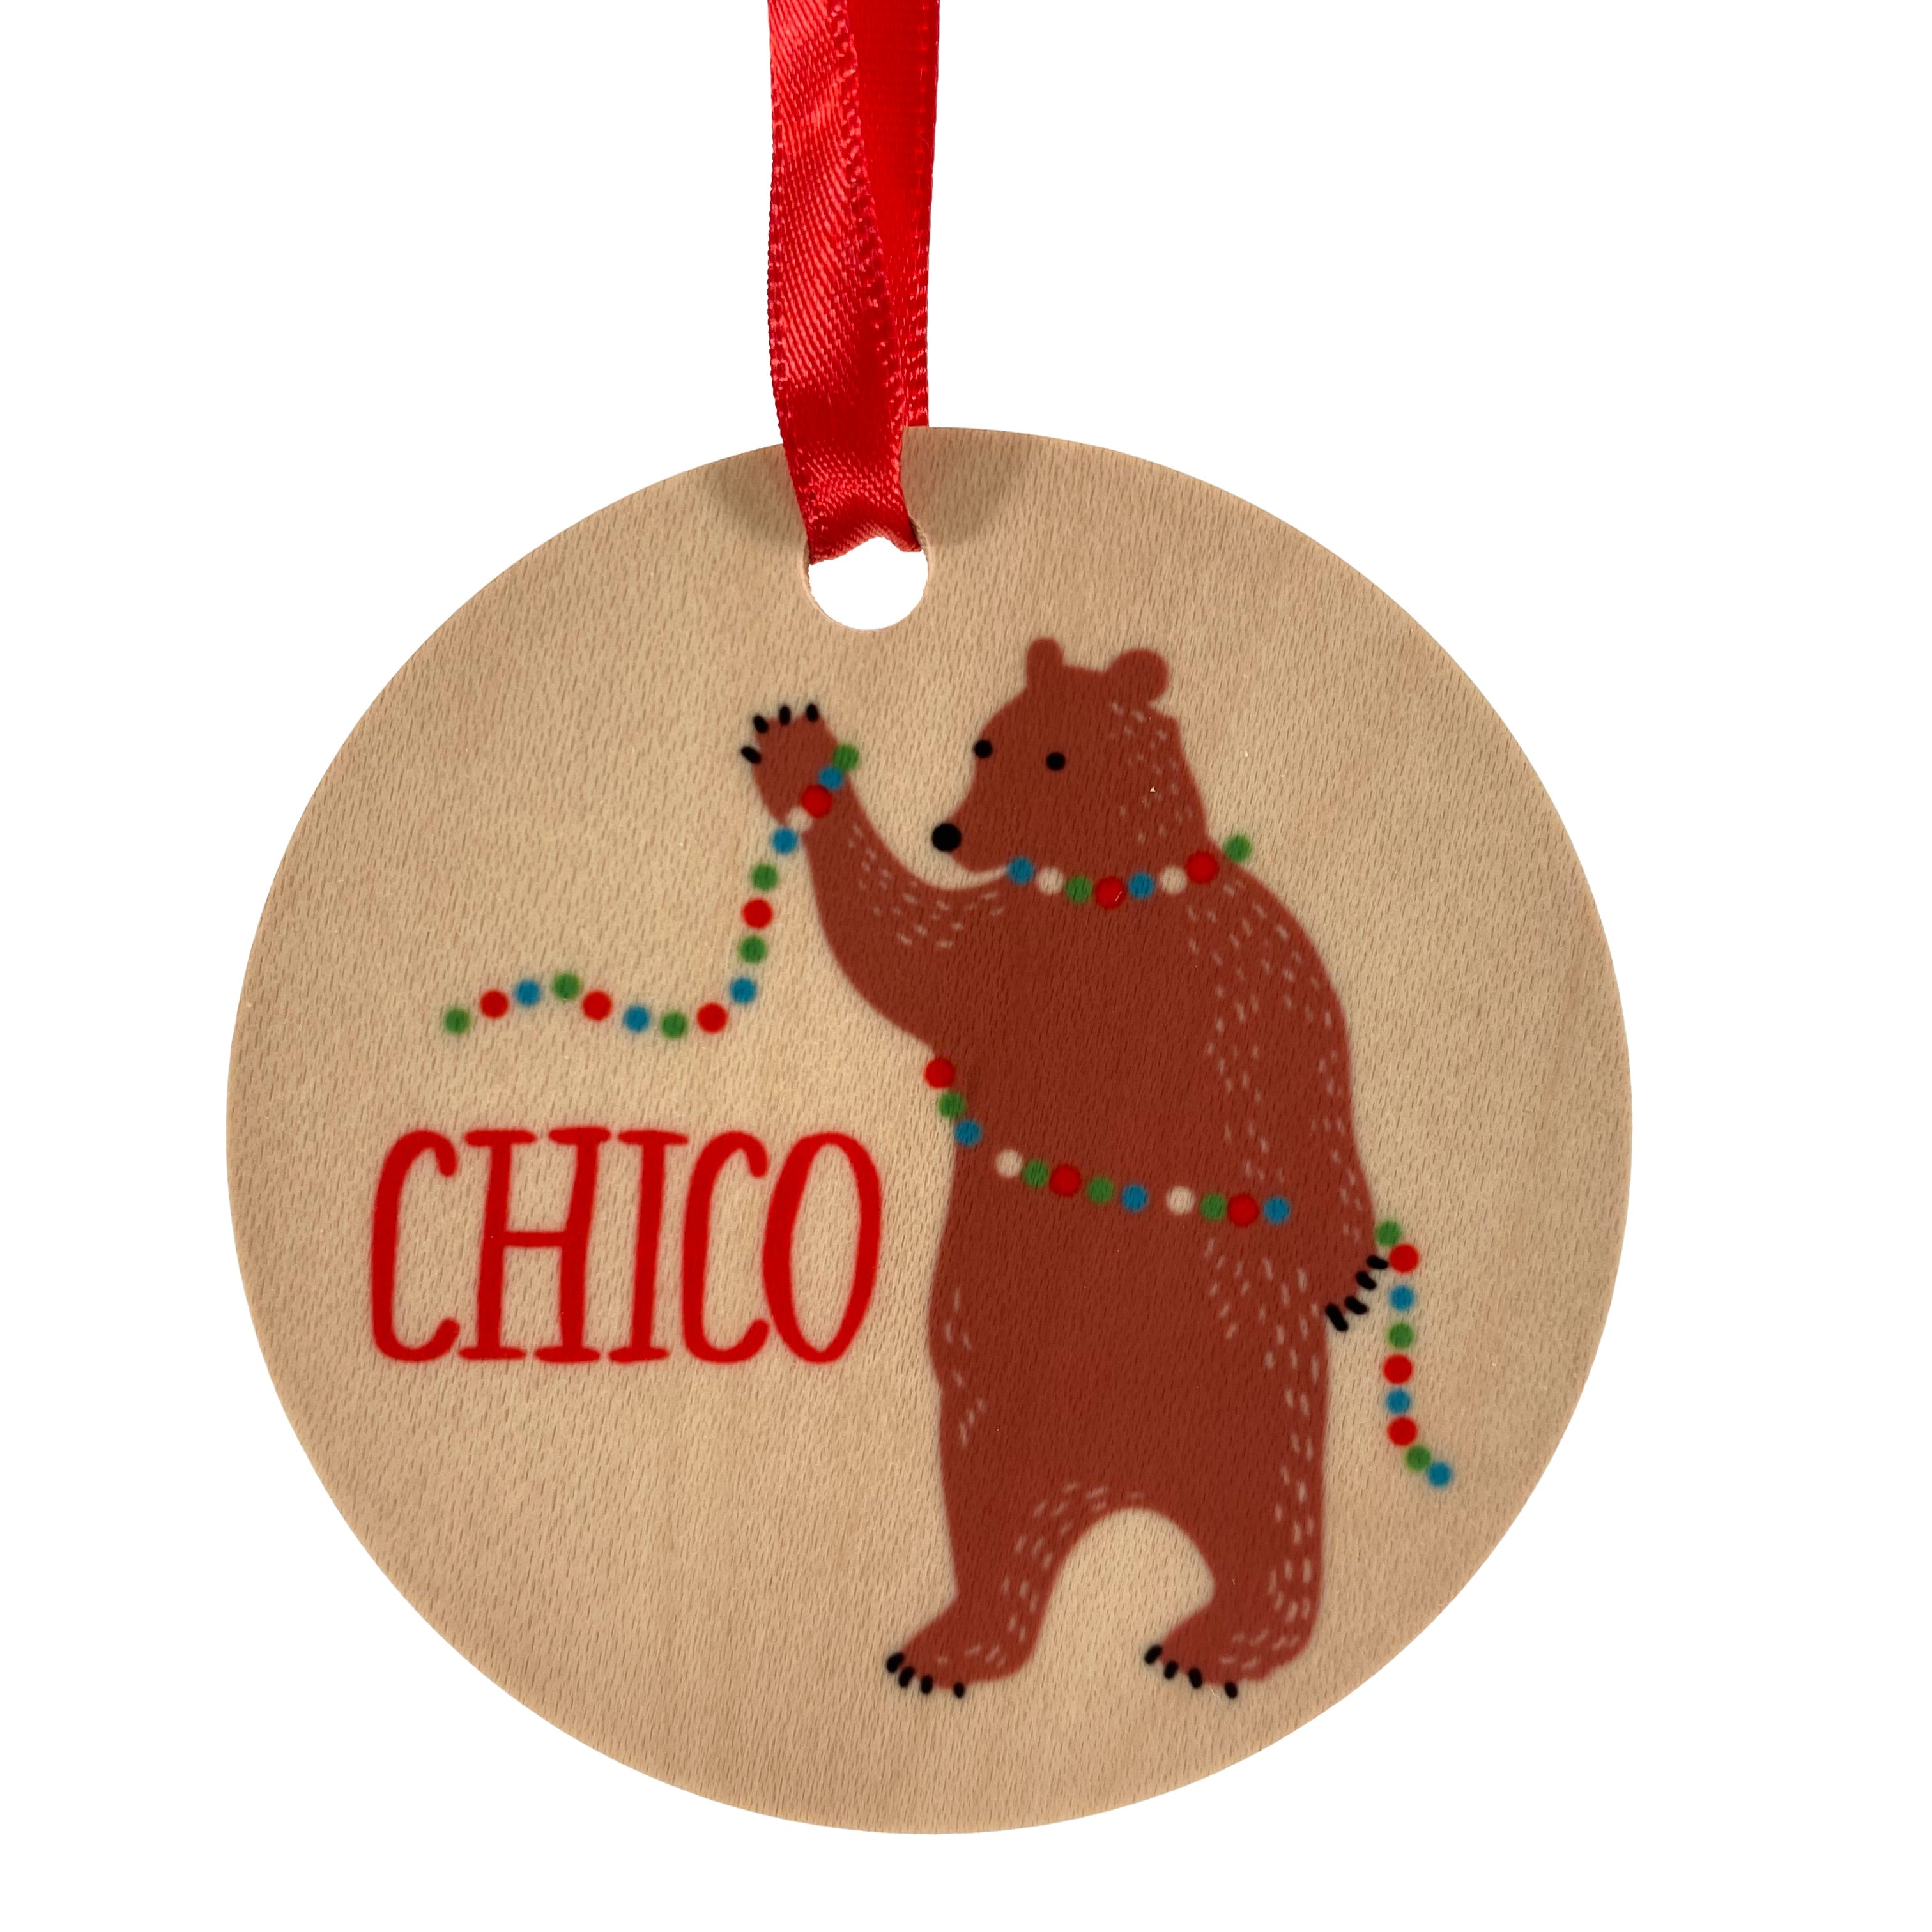 Decorating Bear Wooden Chico Ornament    